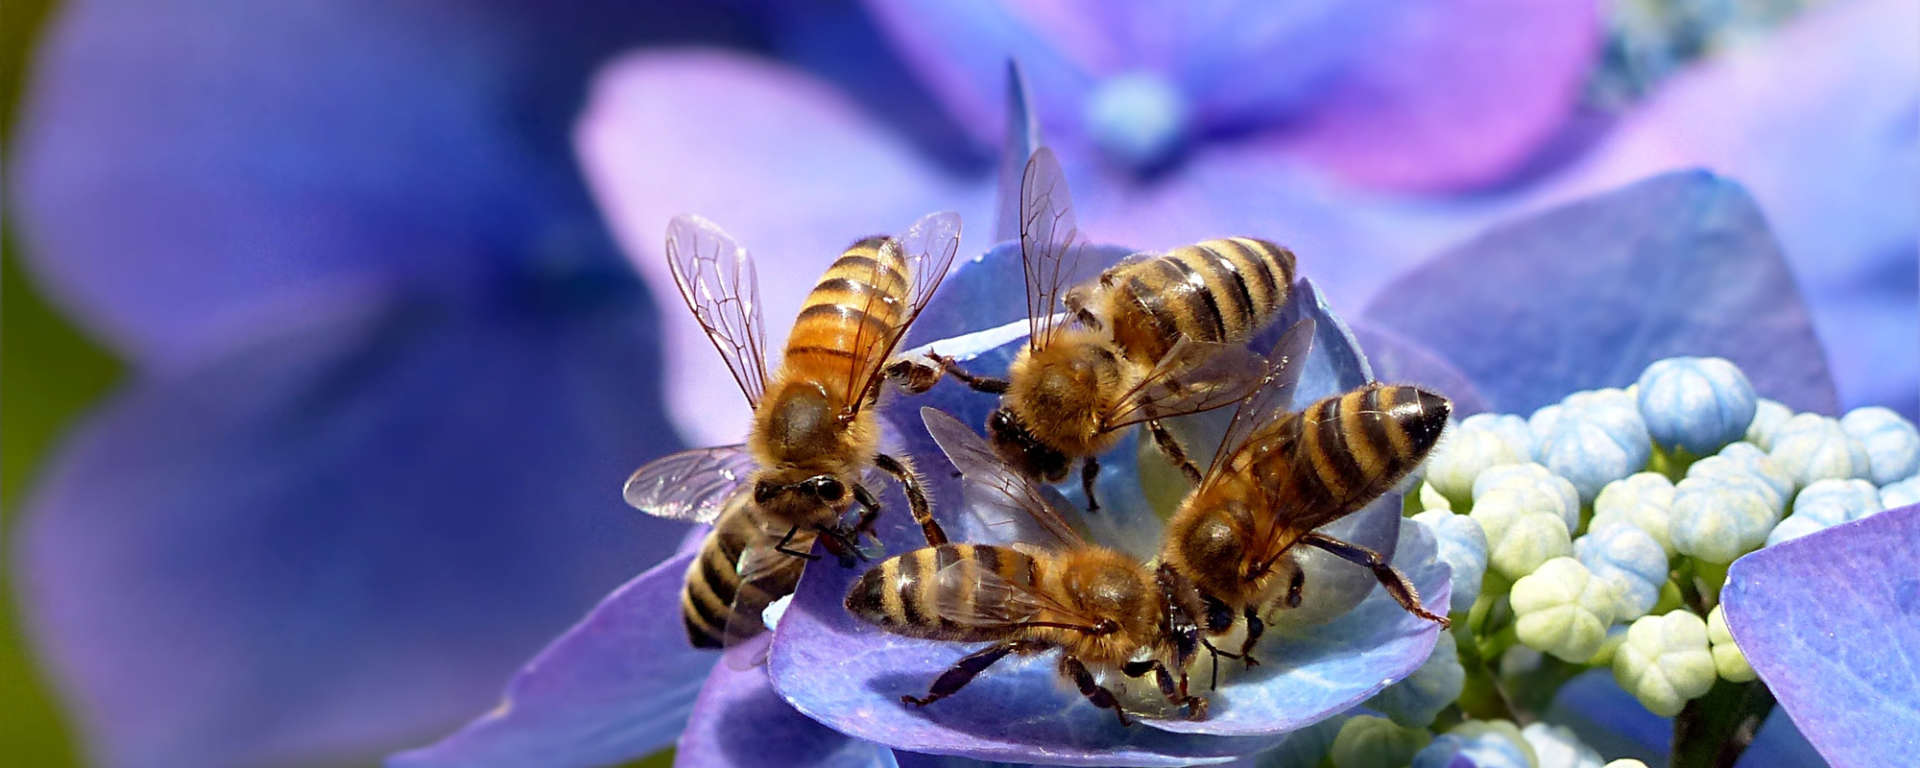 Honey Bees and Flower